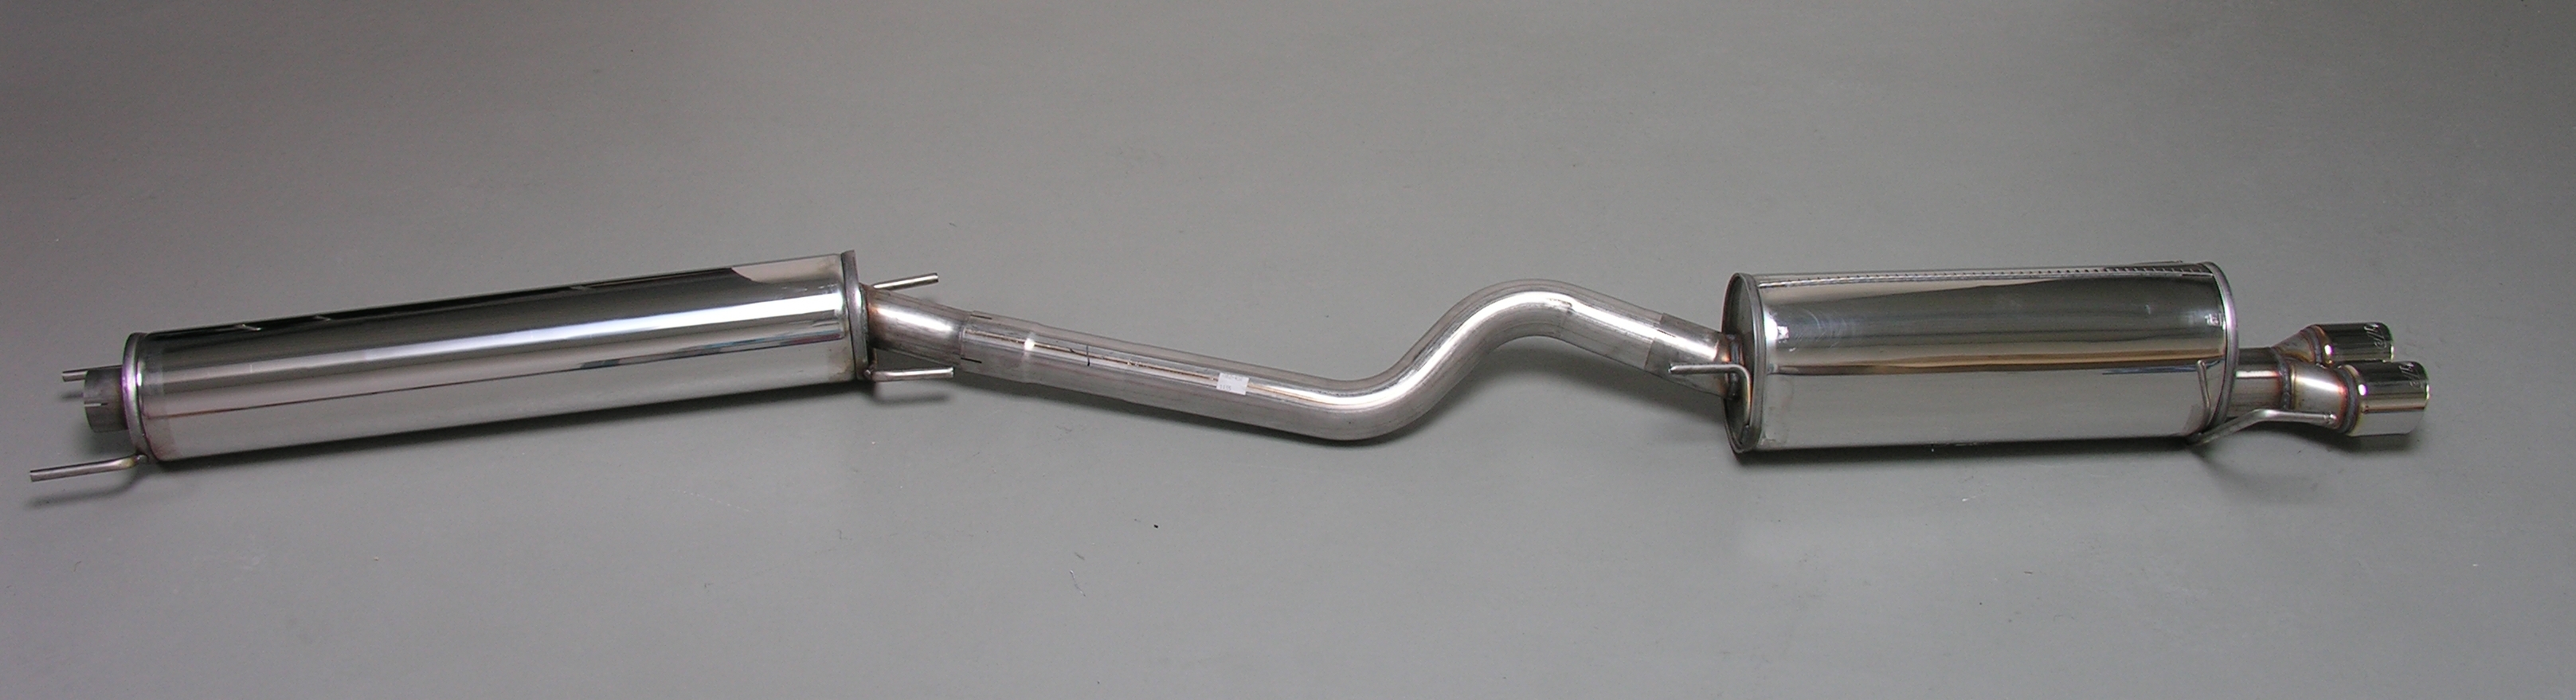 Stainless Steel - Exhaust systems for Opel/ Vauxhall  Astra G Caravan 